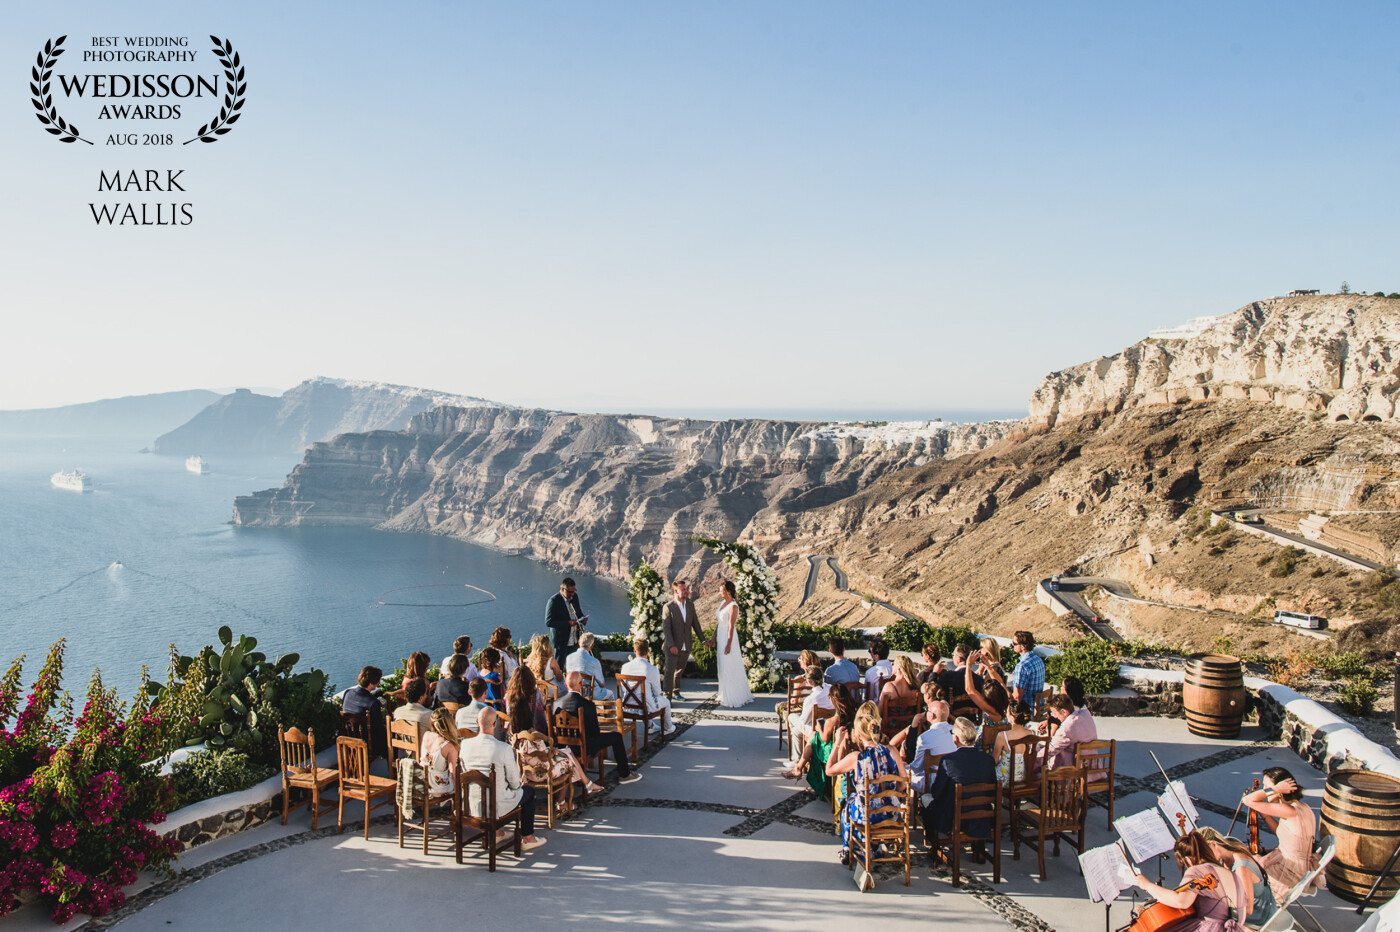 There are many reasons to get married on a clifftop on the Greek island of Santorini, but the key one is the amazing view of the caldera that dominates the place. This couple had a long 'Mamma Mia' themed ceremony which gave me the opportunity to climb a staircase and get this wide angle shot.